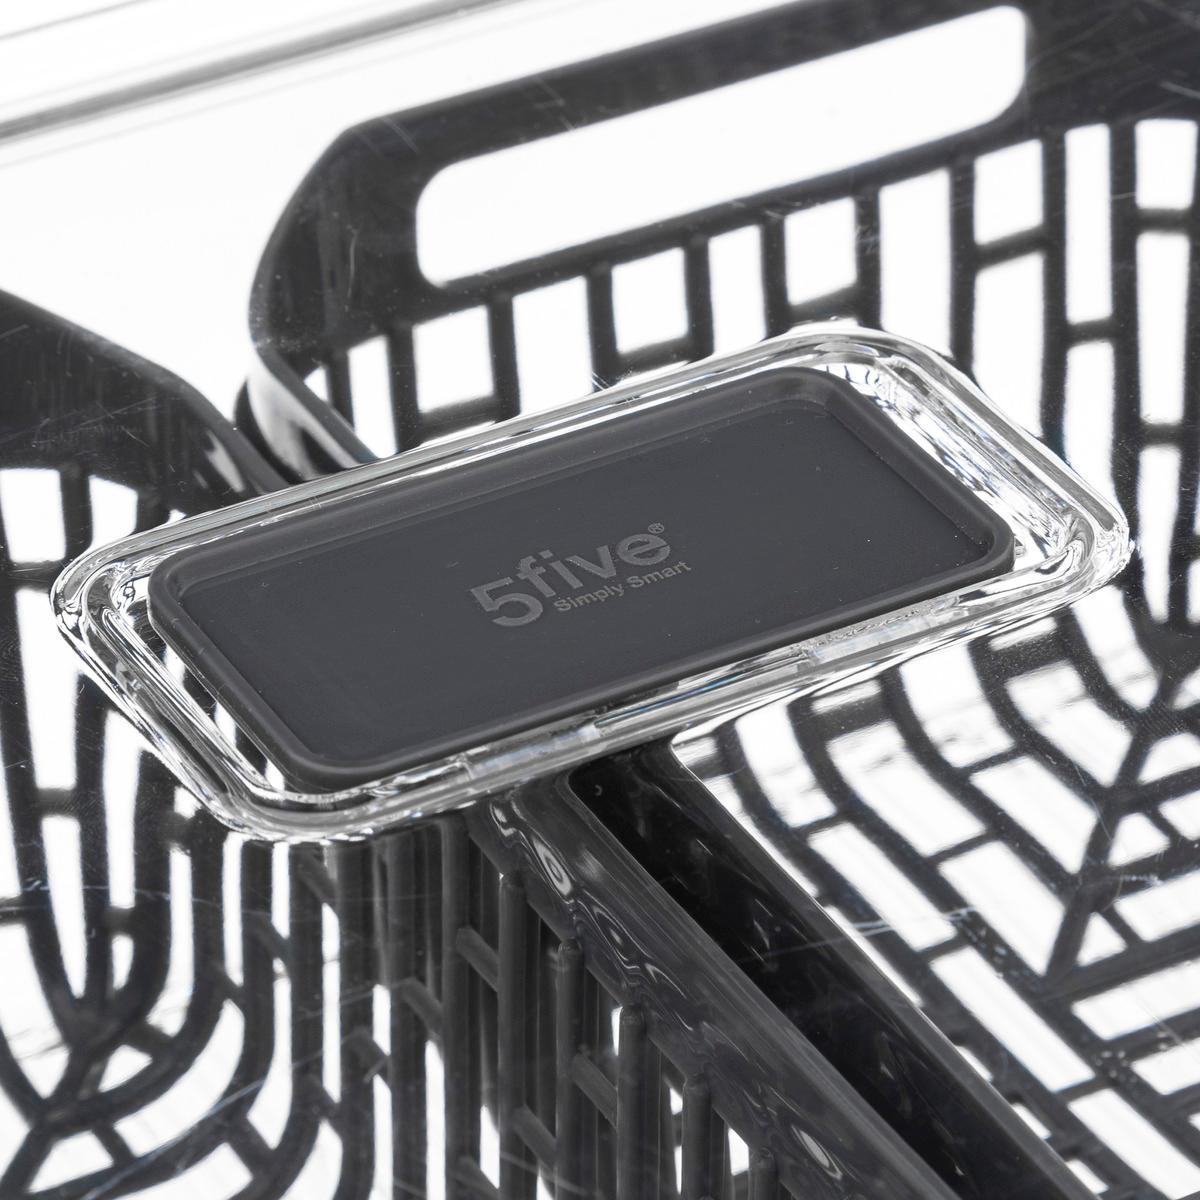 Dish Drainer Grey by 5five - Simply Smart